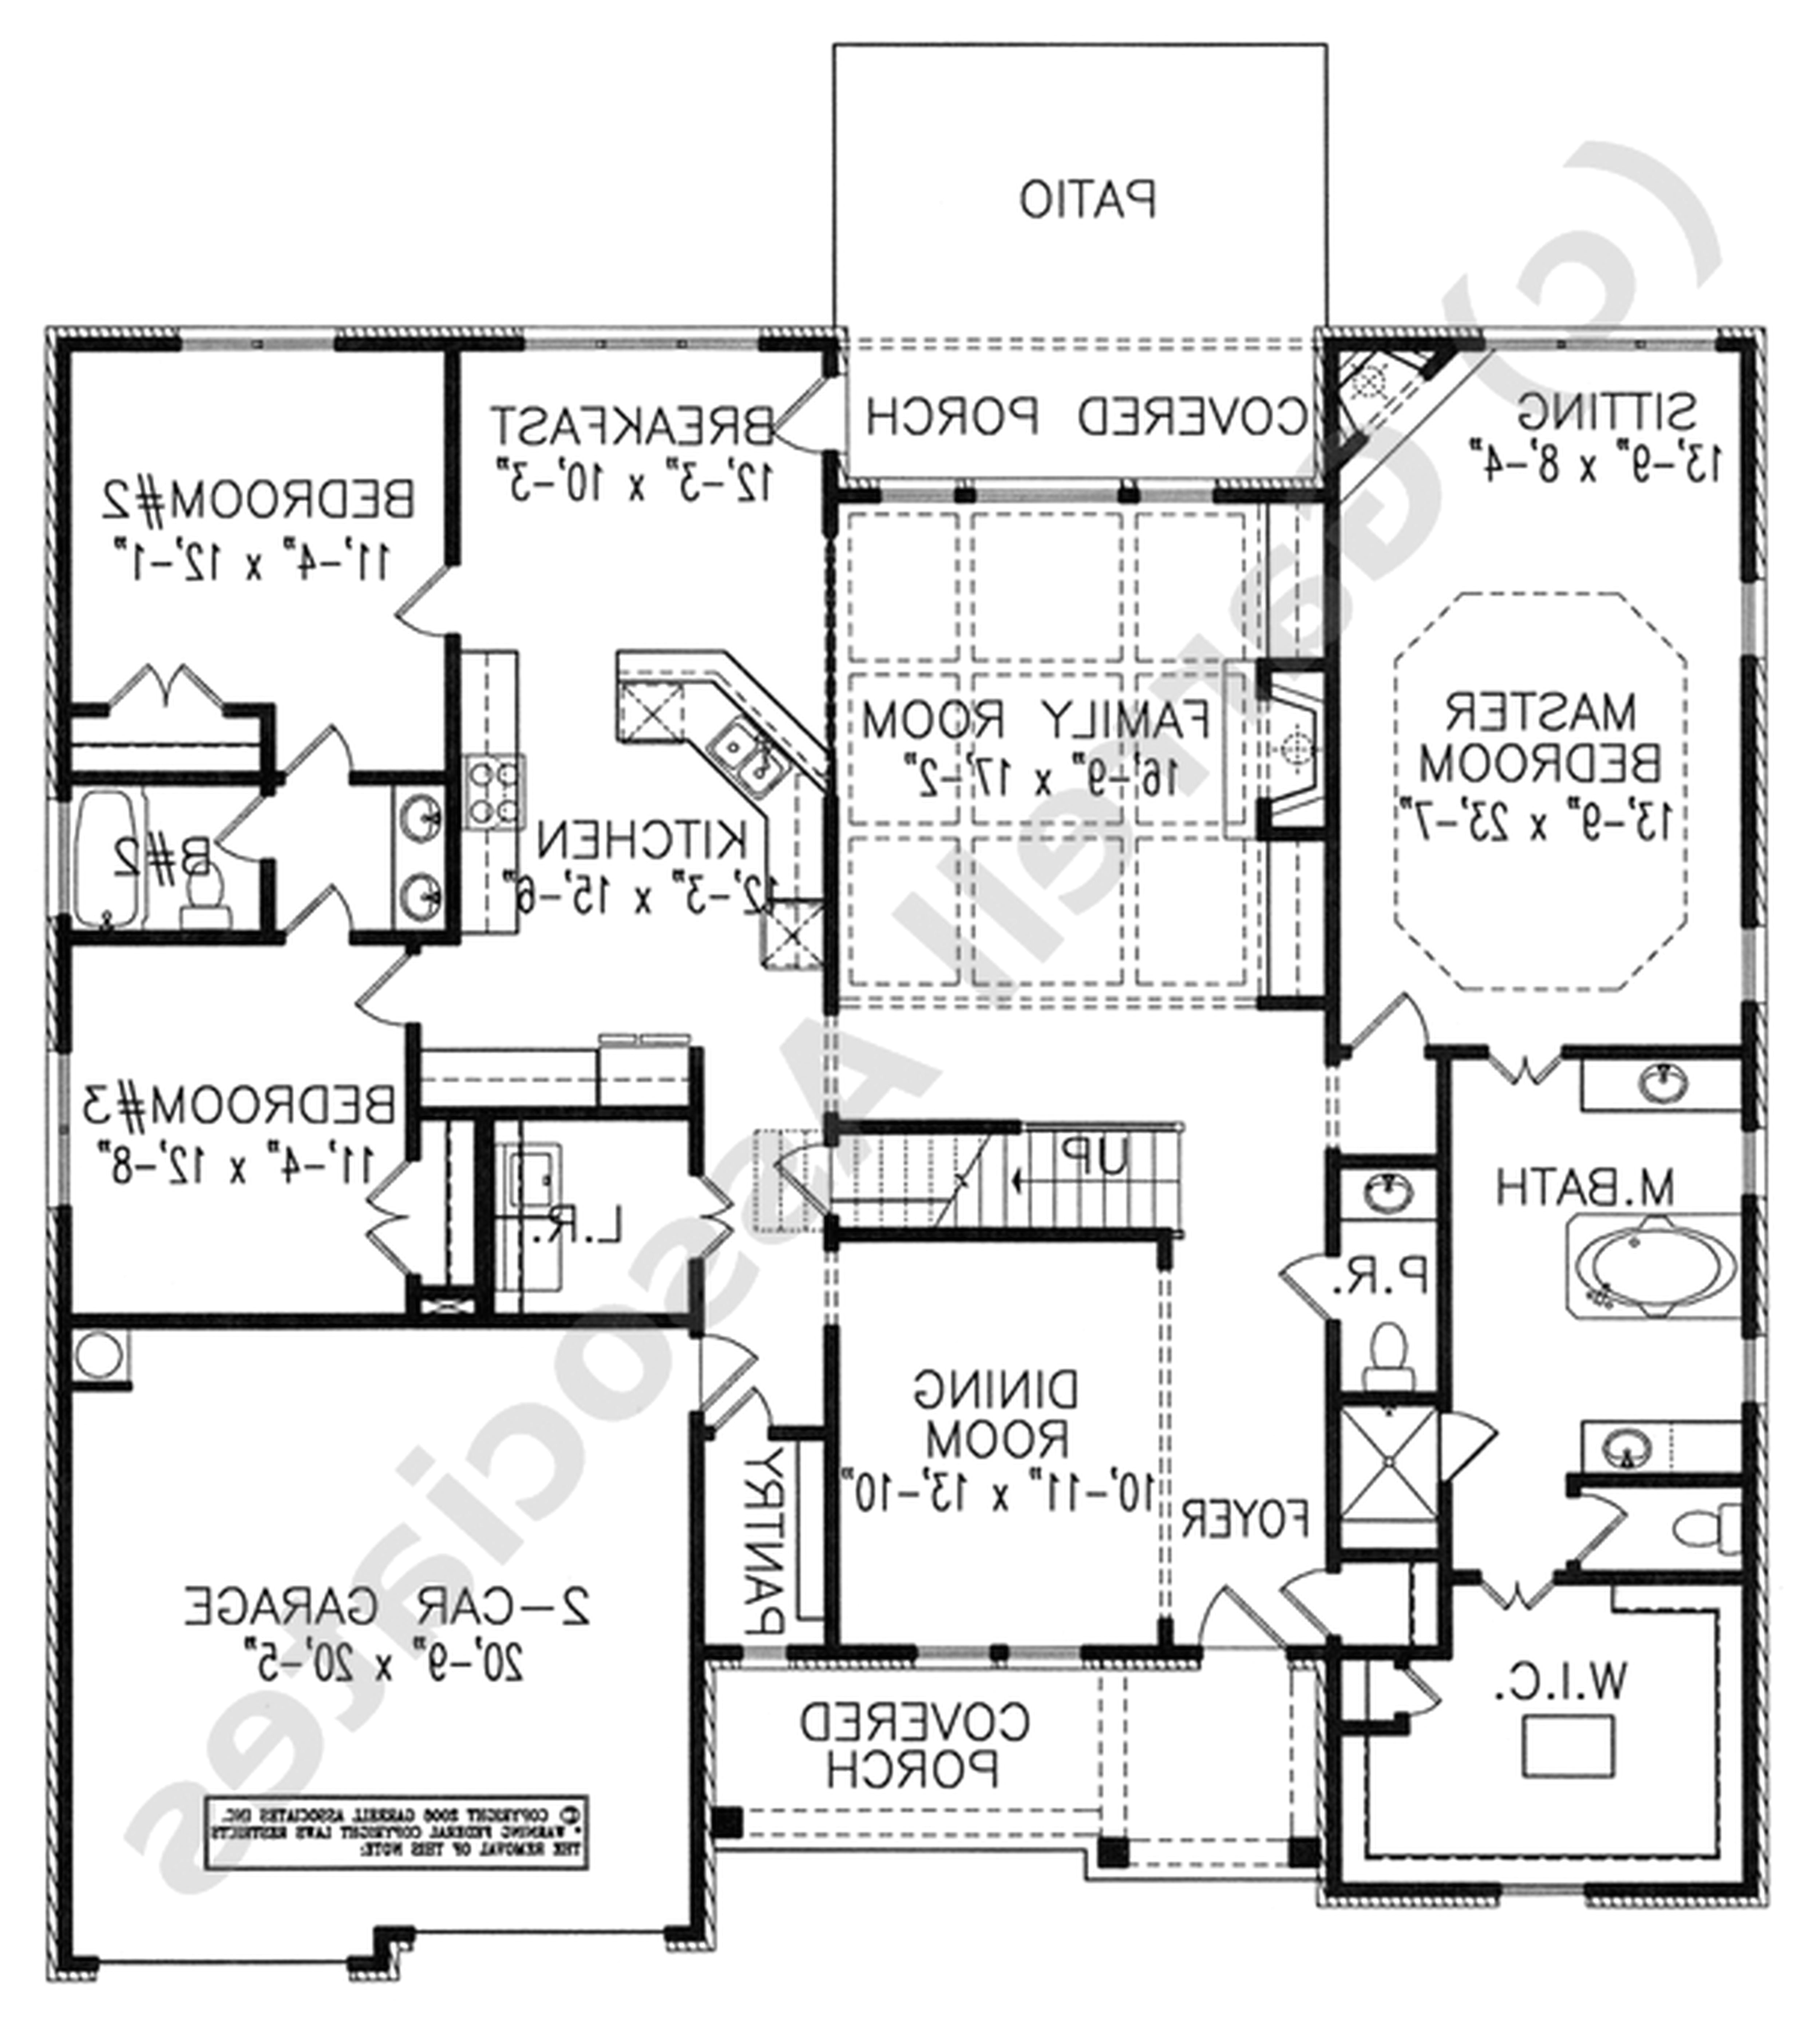 comely designing a house modern home interior plans with tritmonk online virtual design inspiration designers computer i backyard uk much